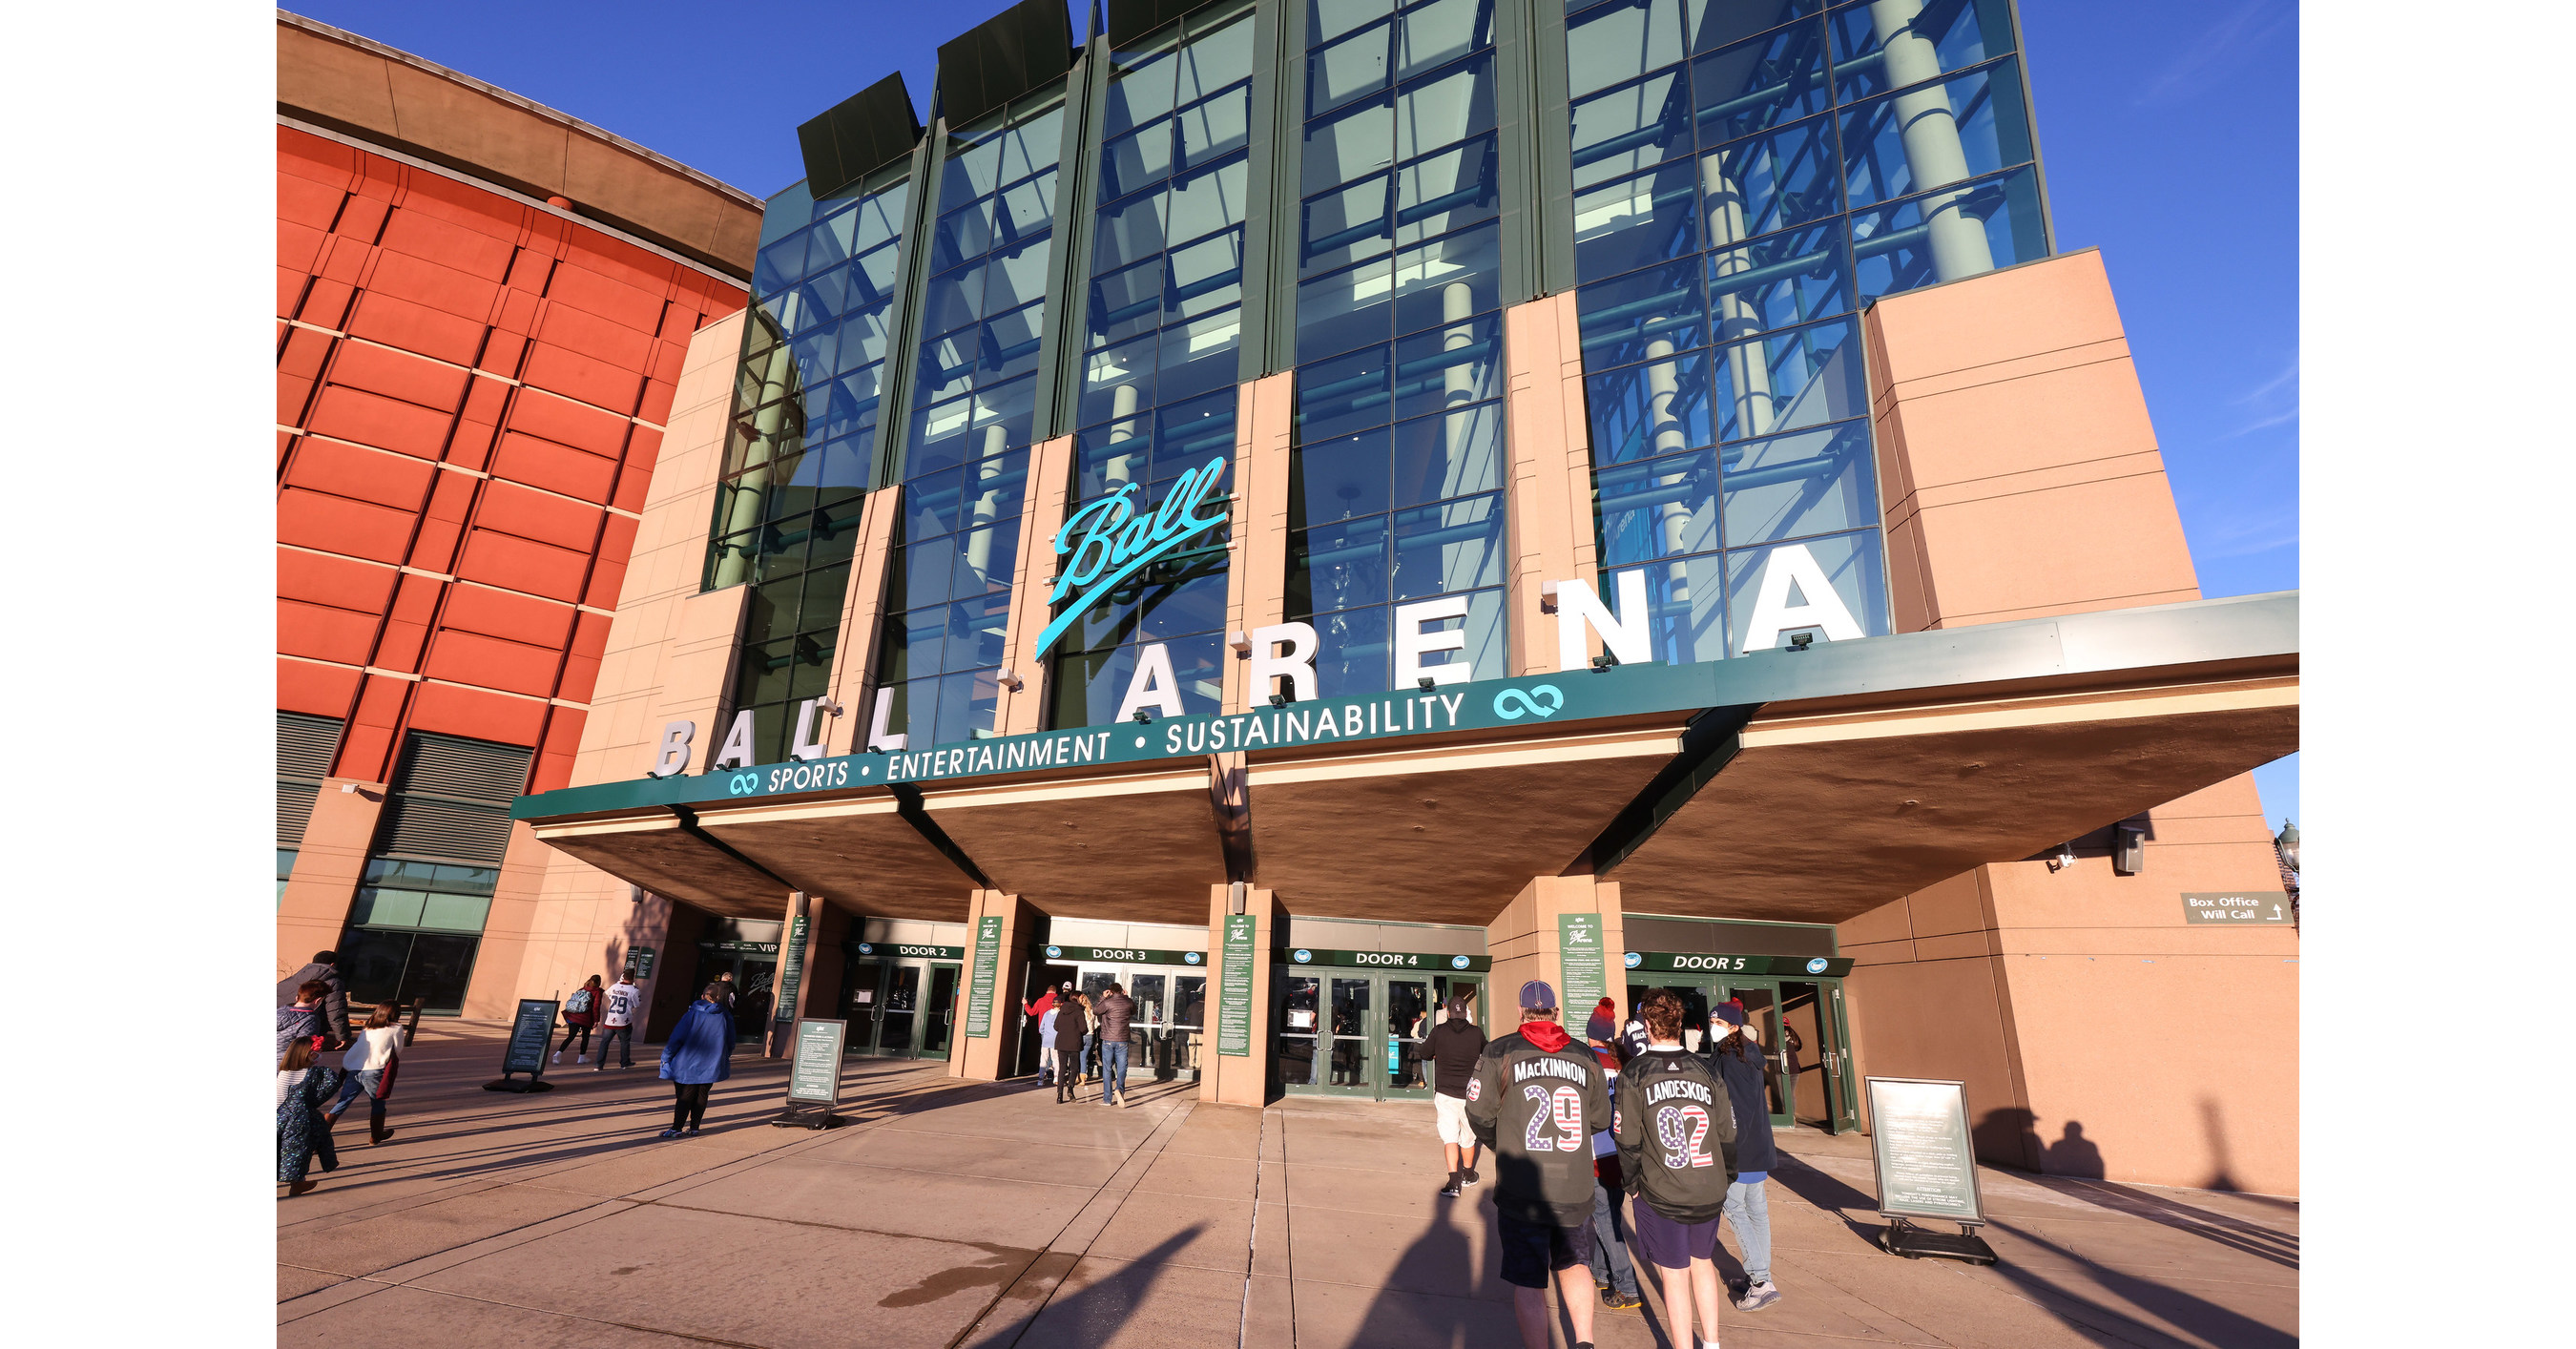 Pepsi Center To Be Renamed 'Ball Arena' Under New Partnership